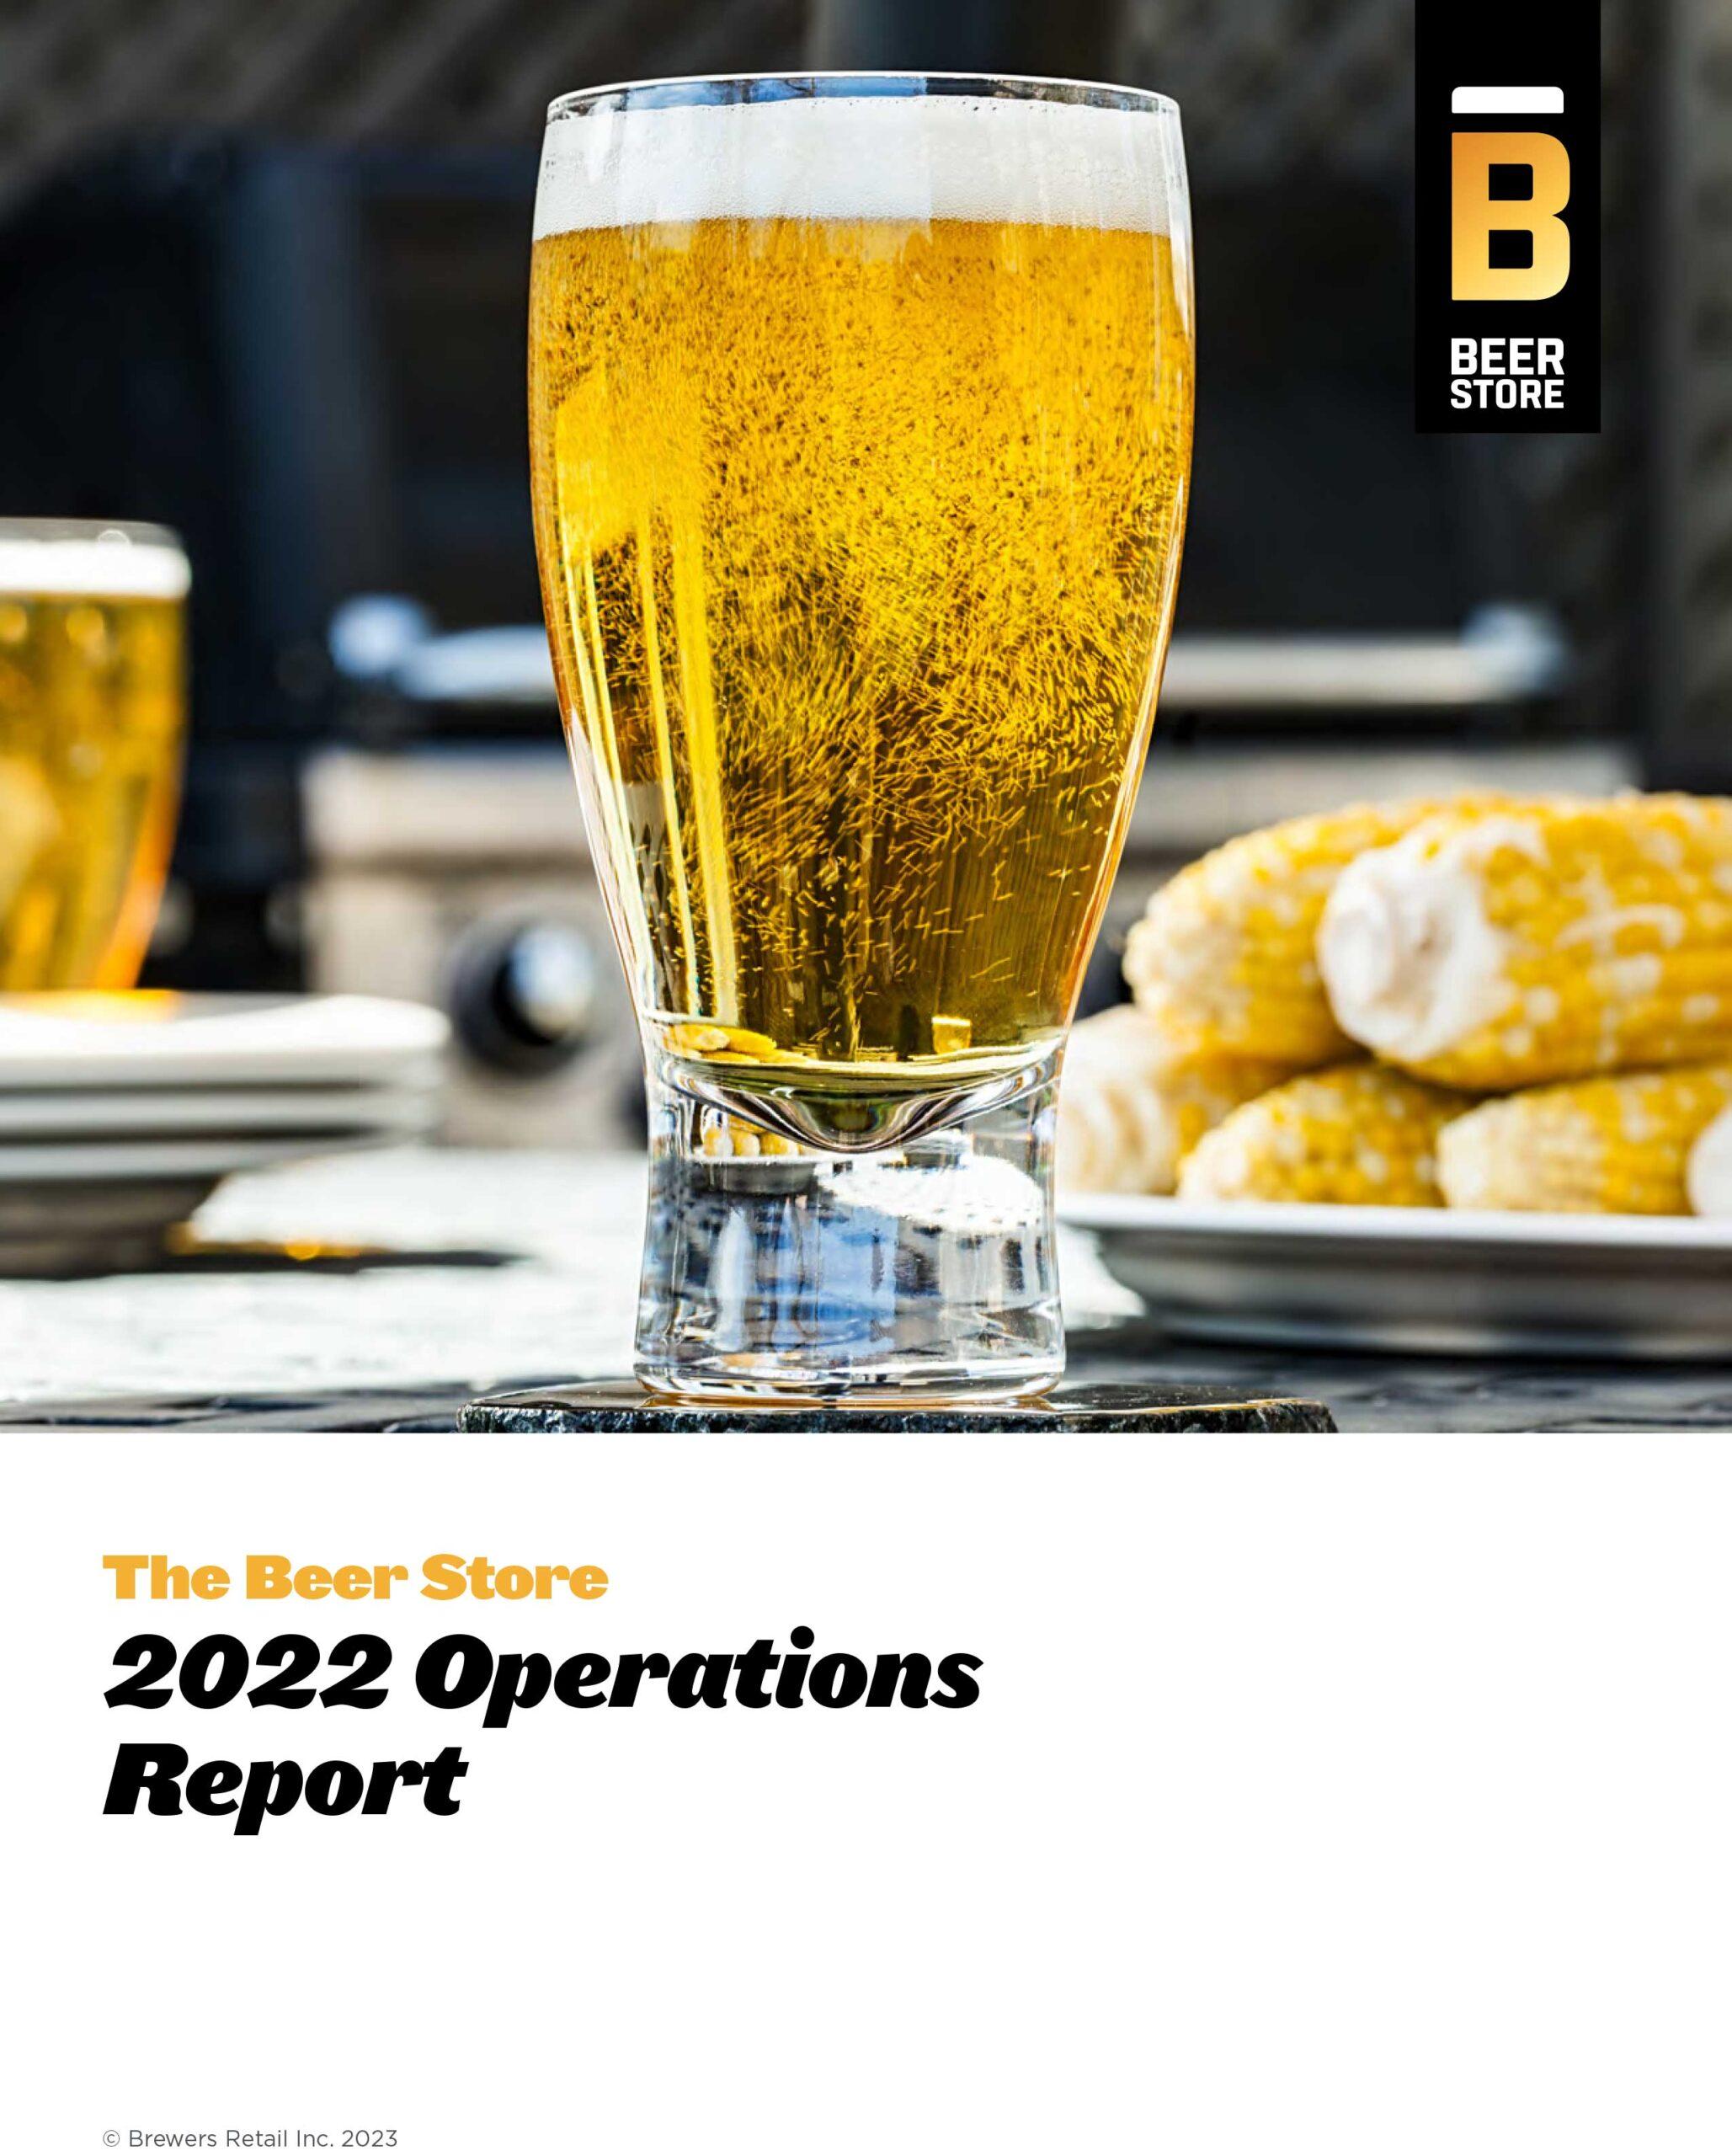 The Beer Stores Operational Report